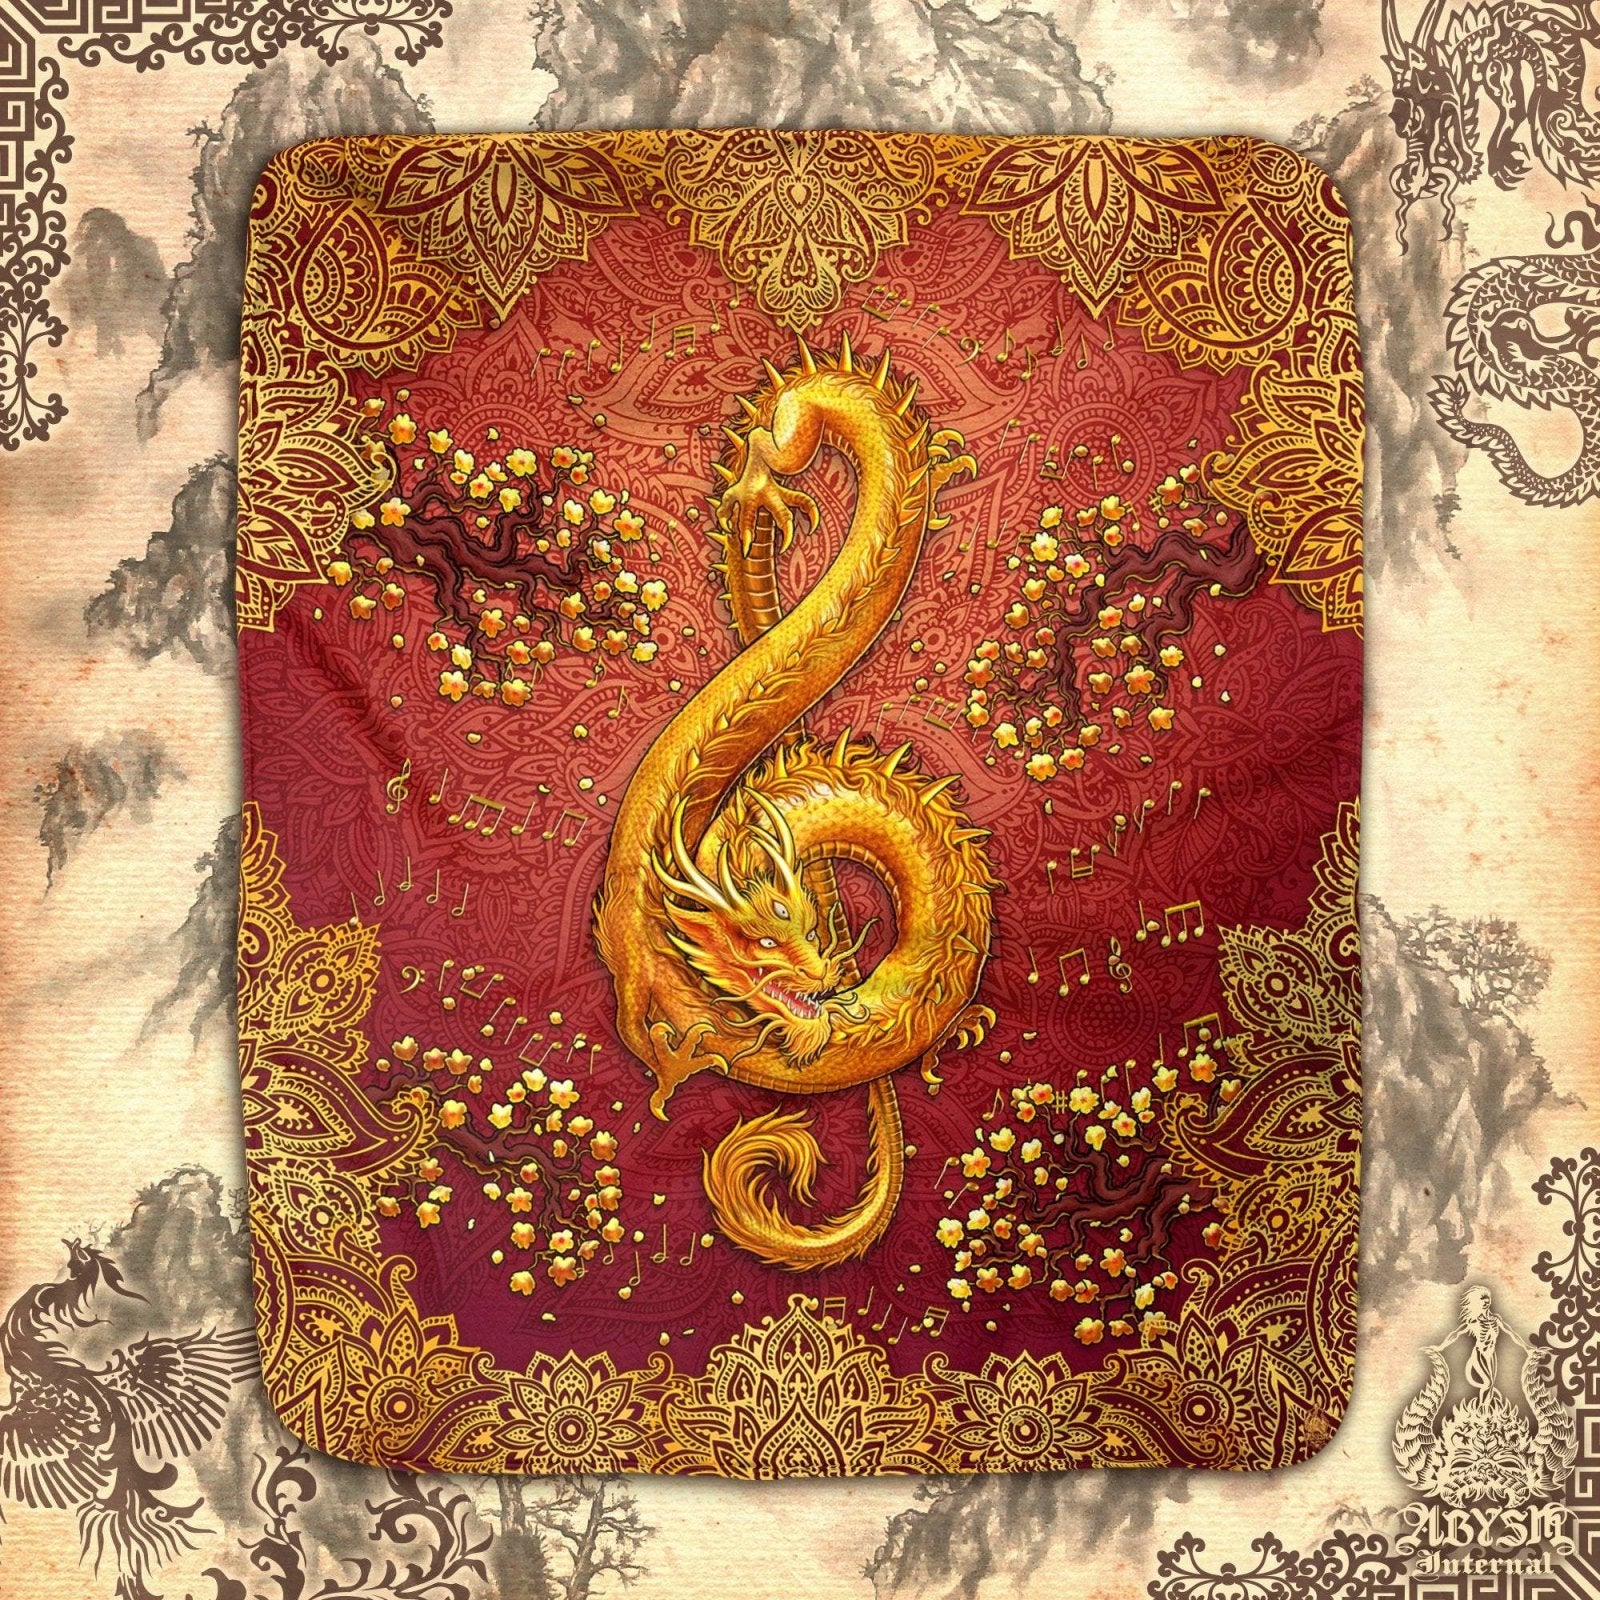 Boho Throw Fleece Blanket, Treble Clef, Music Art, Hippie and Indie Decor, Eclectic and Funky Gift - Gold Dragon, Mandala - Abysm Internal